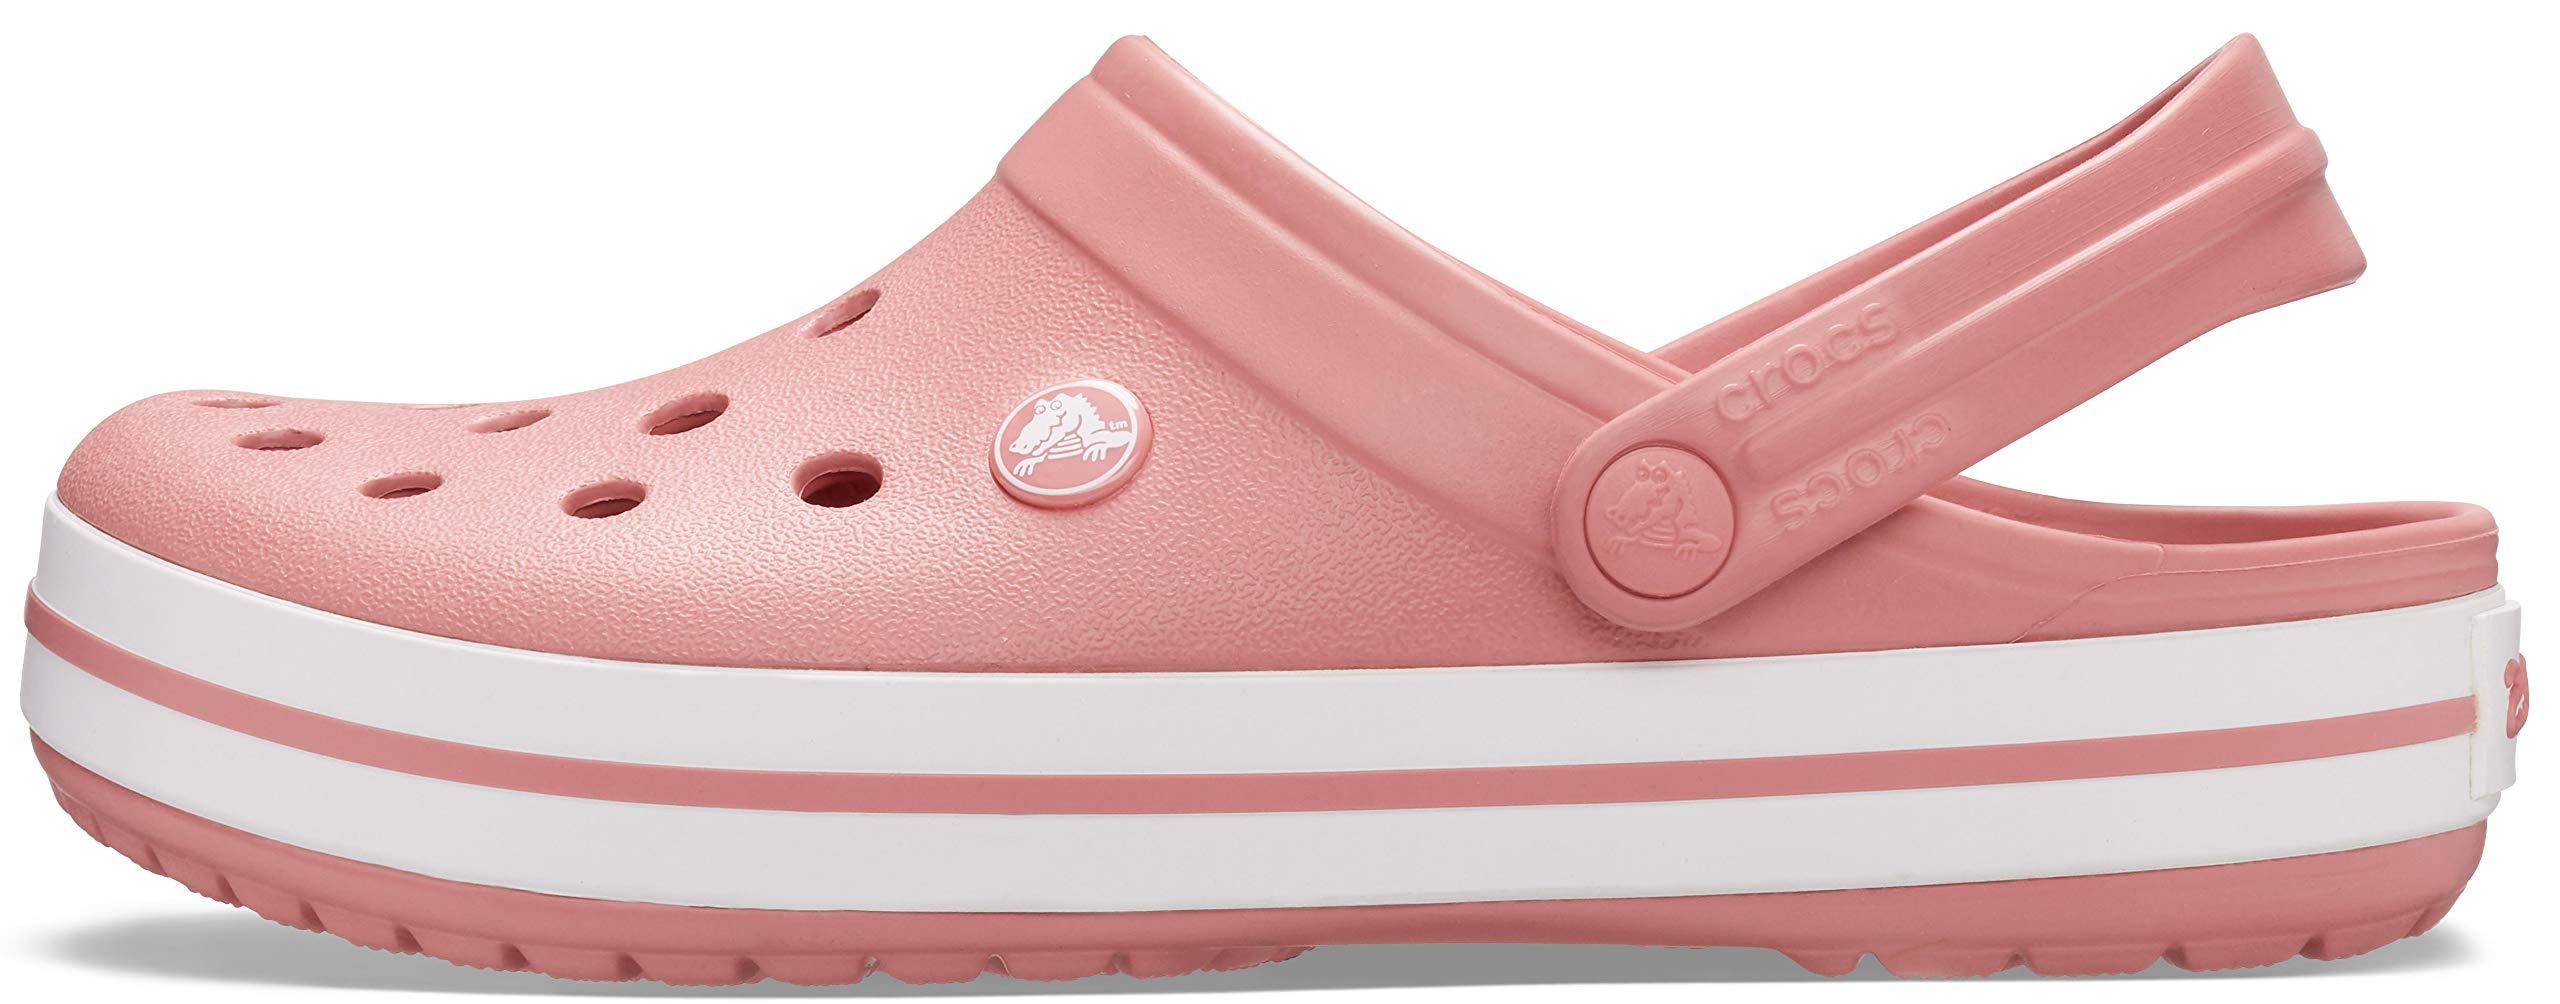 Crocs™ Crocband Clog in Blossom/White (Pink) | Lyst